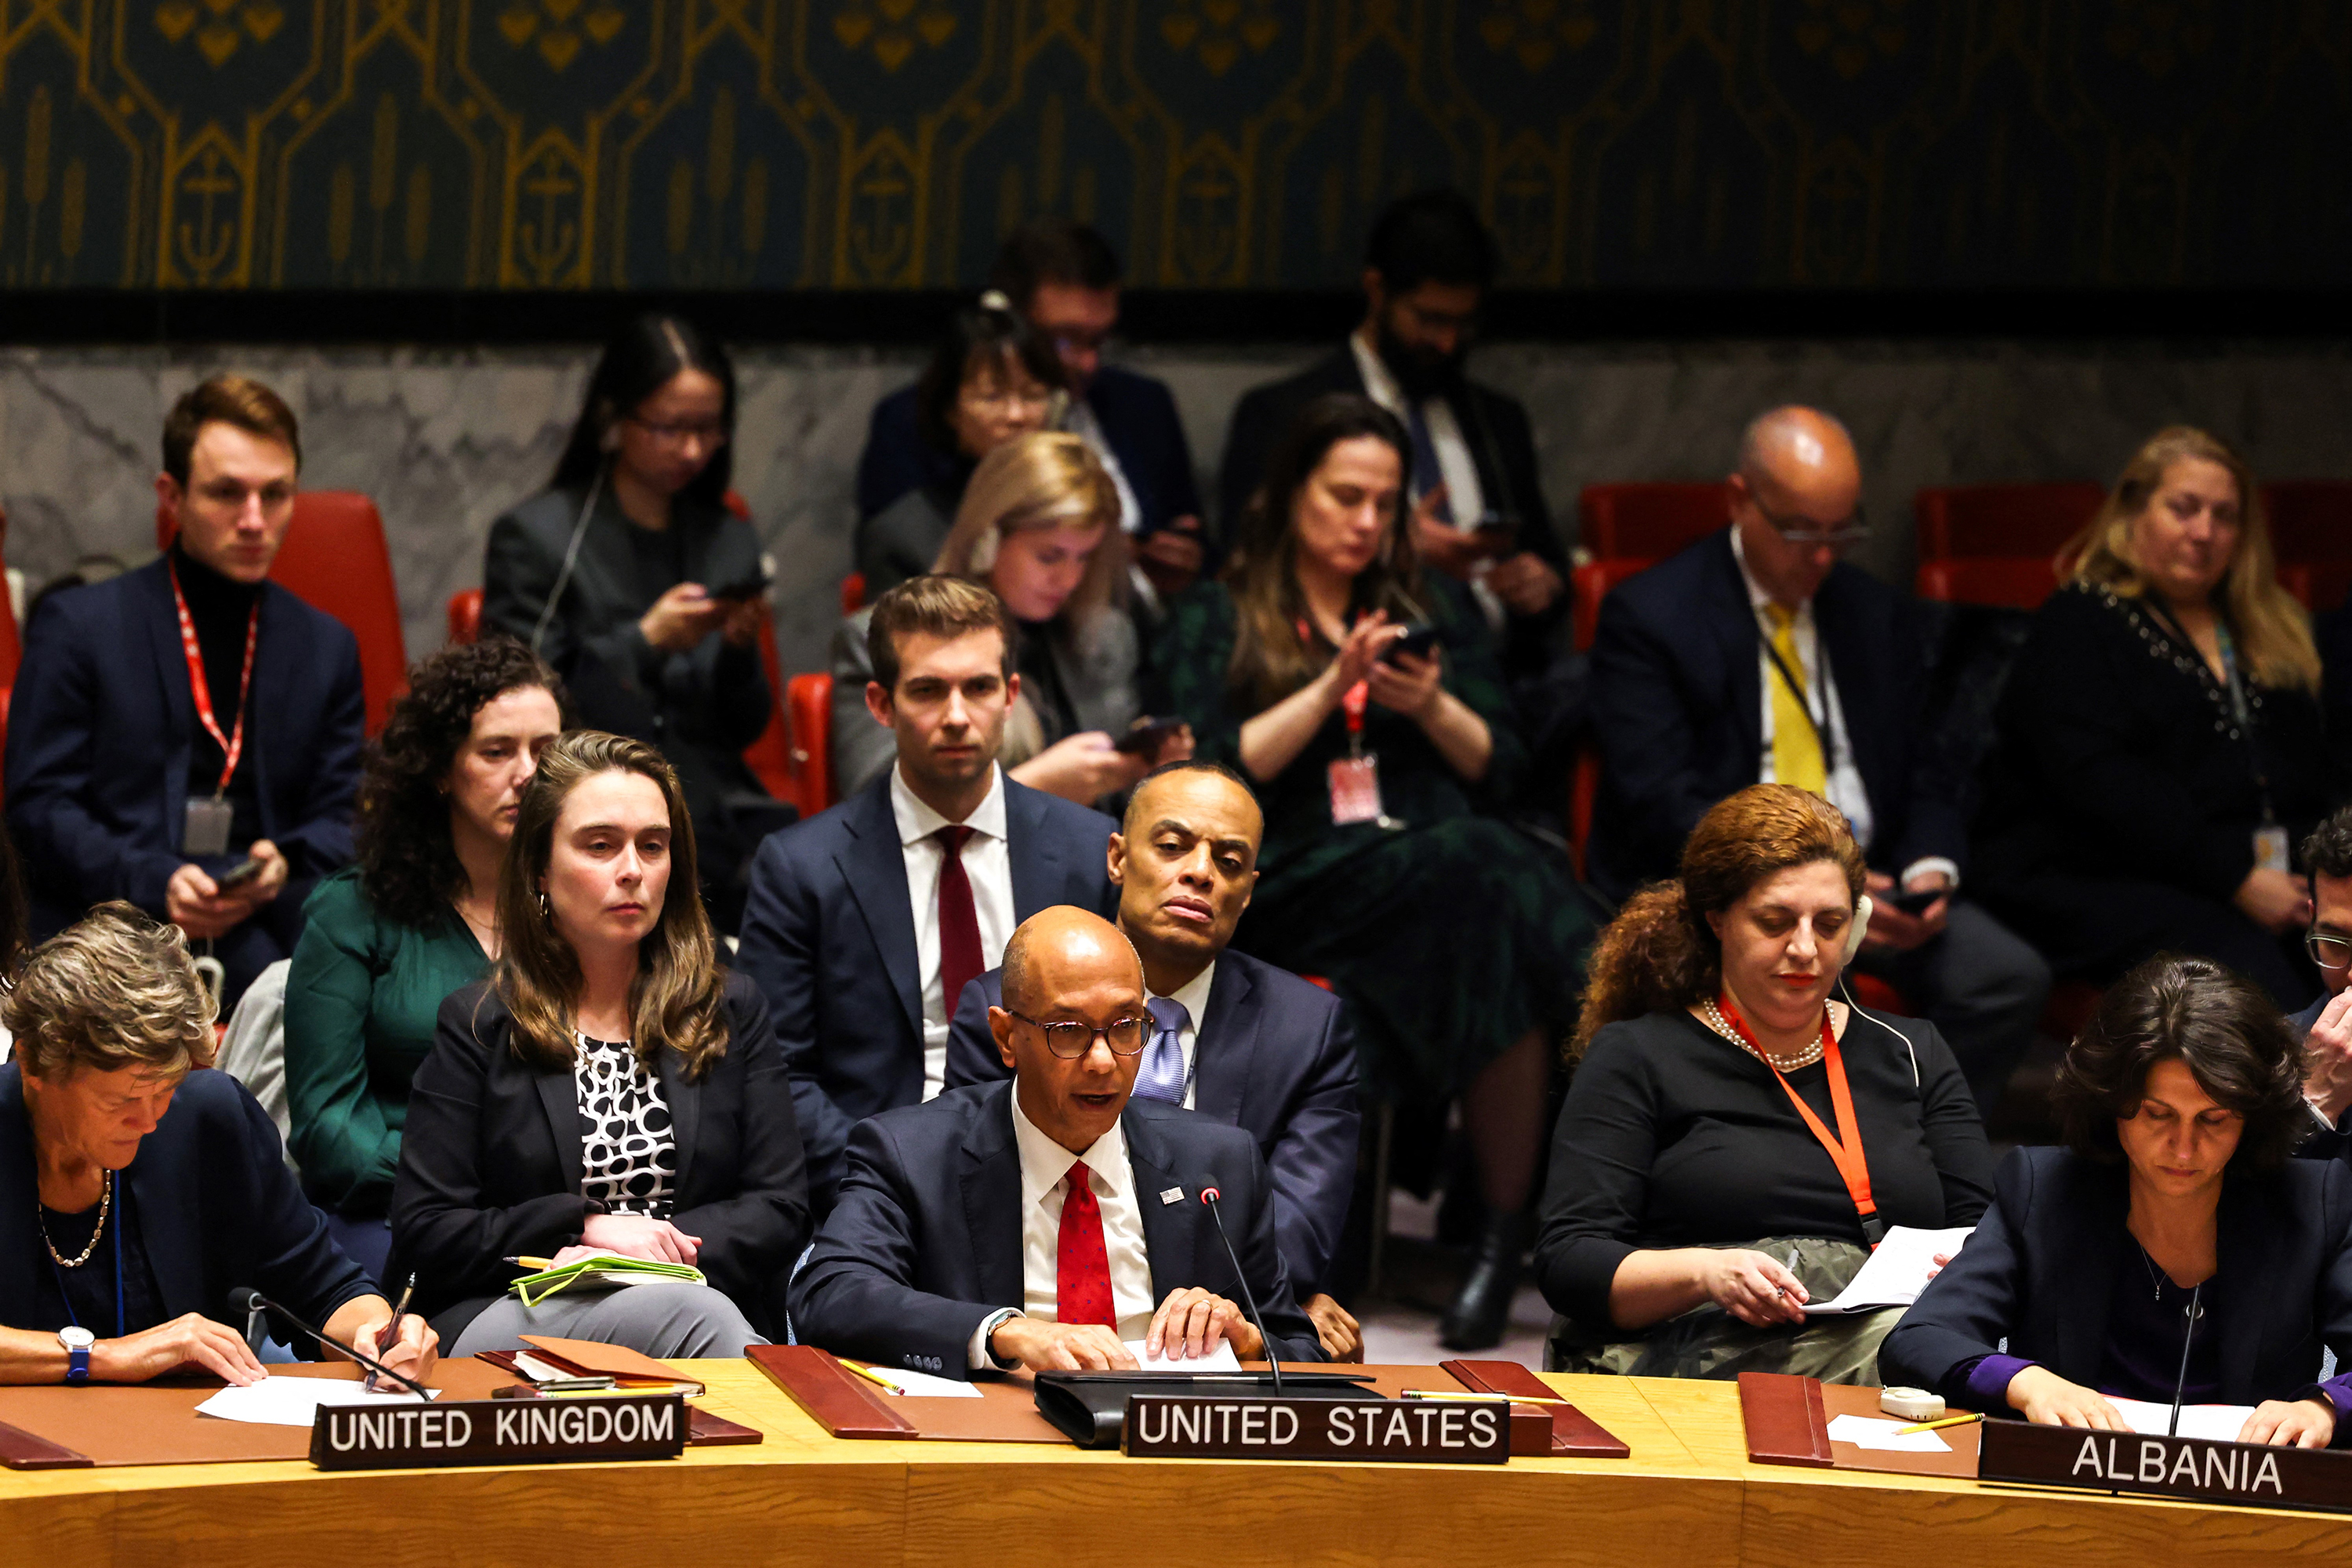 US Deputy Ambassador to the UN Robert Wood speaks during a United Nations Security Council after the vote about a ceasefire in Gaza at UN headquarters in New York on December 8.